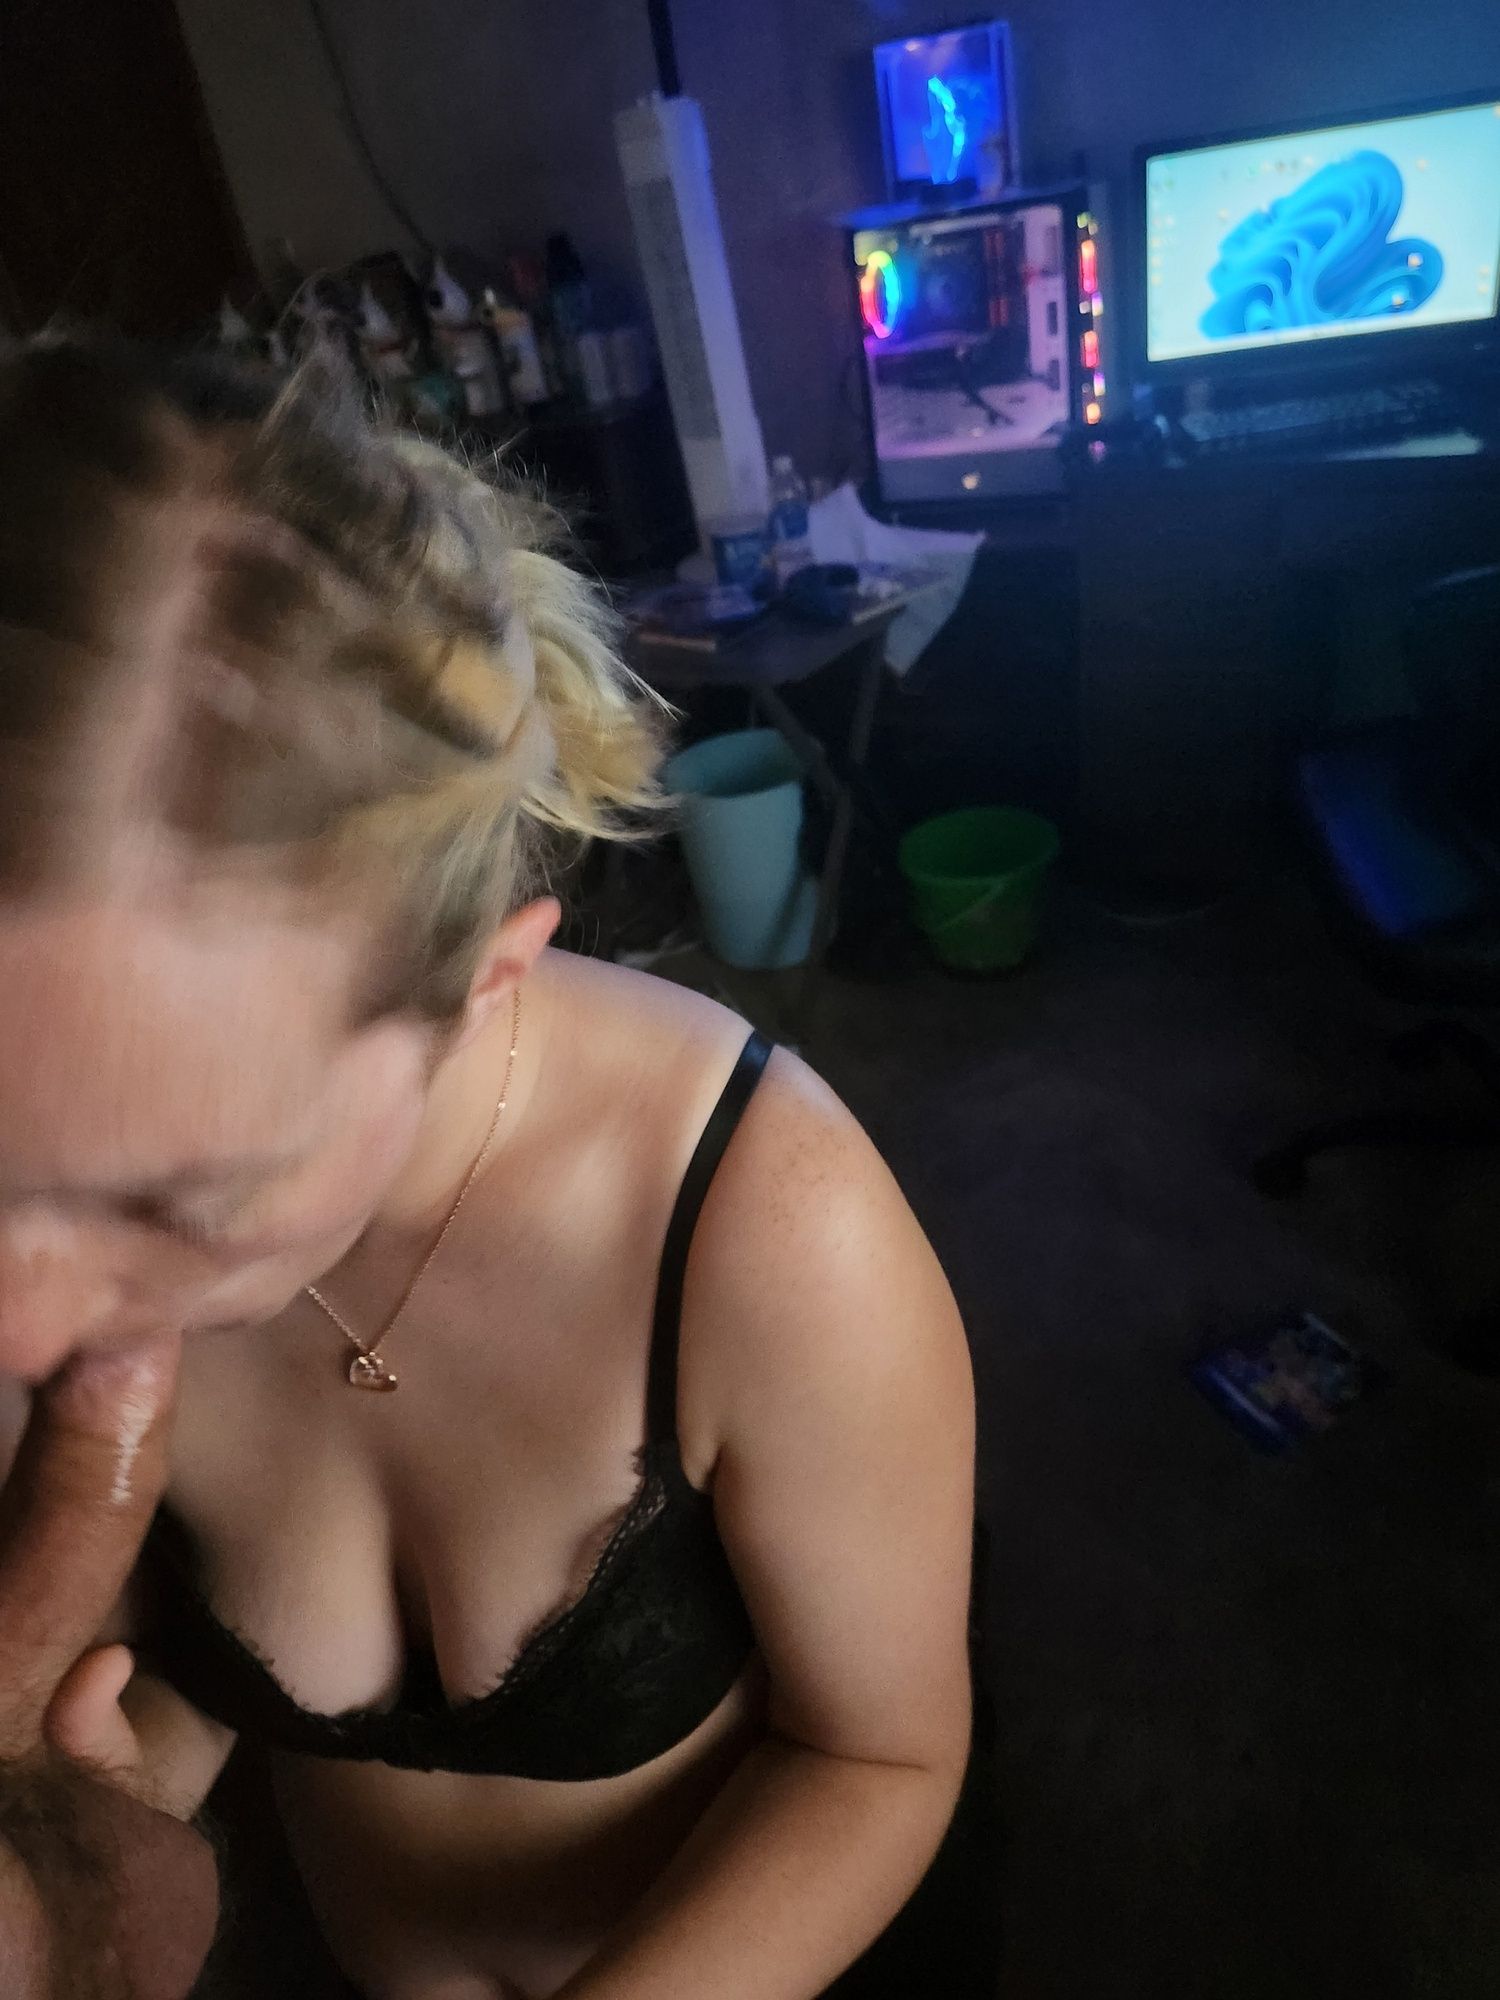 Mama_Foxx94 - Late night adult time (VIDEO ON PROFILE) #25